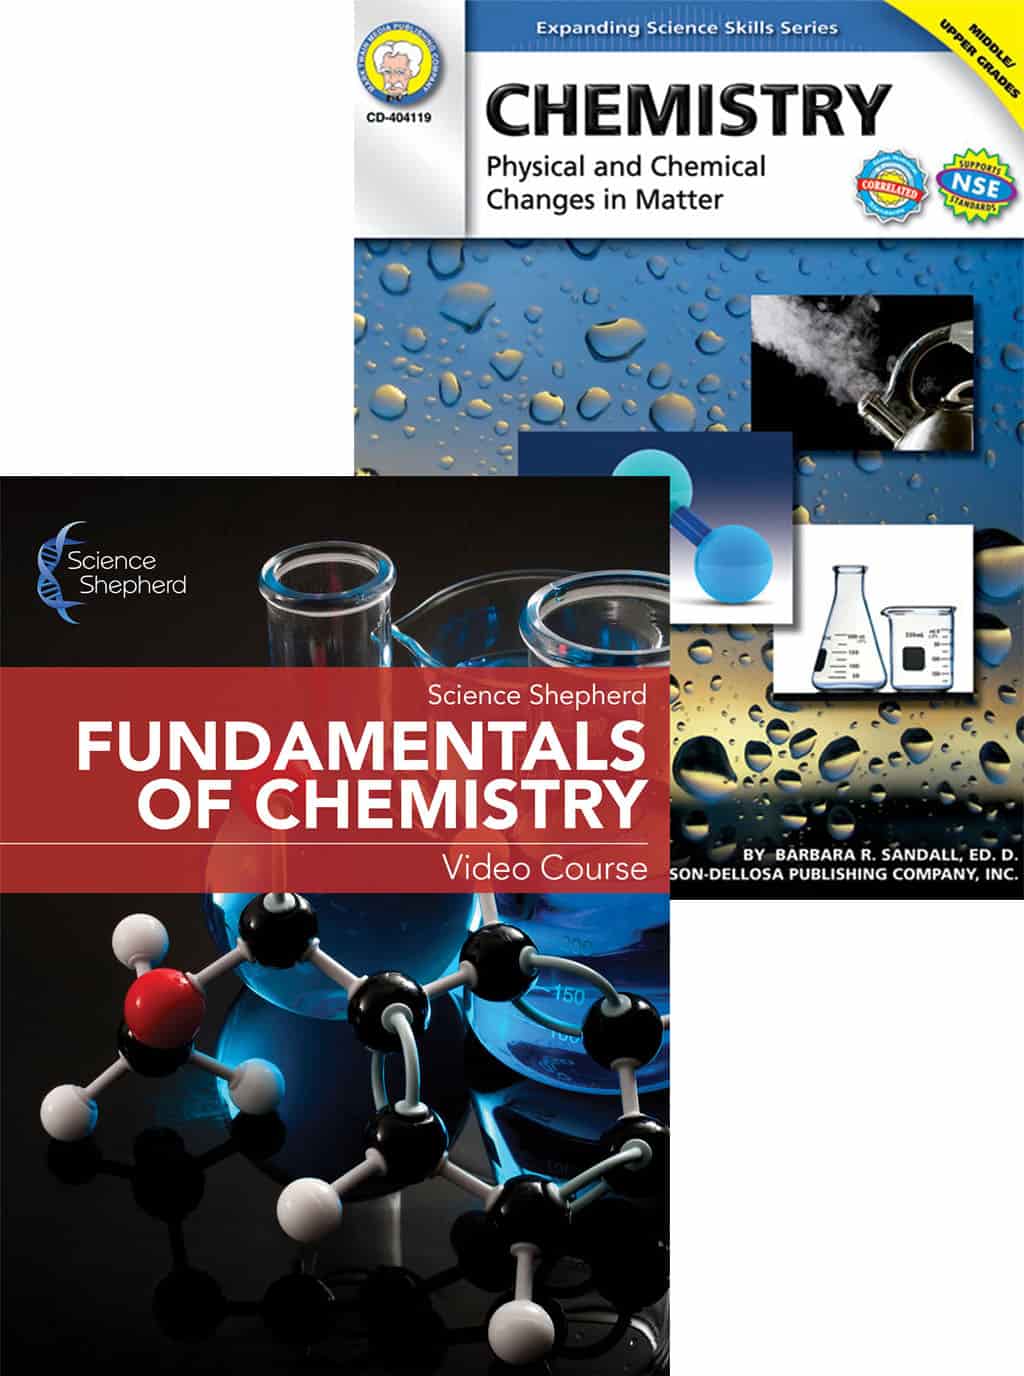 Fundamentals of Chemistry homeschool videos with lab manual cover